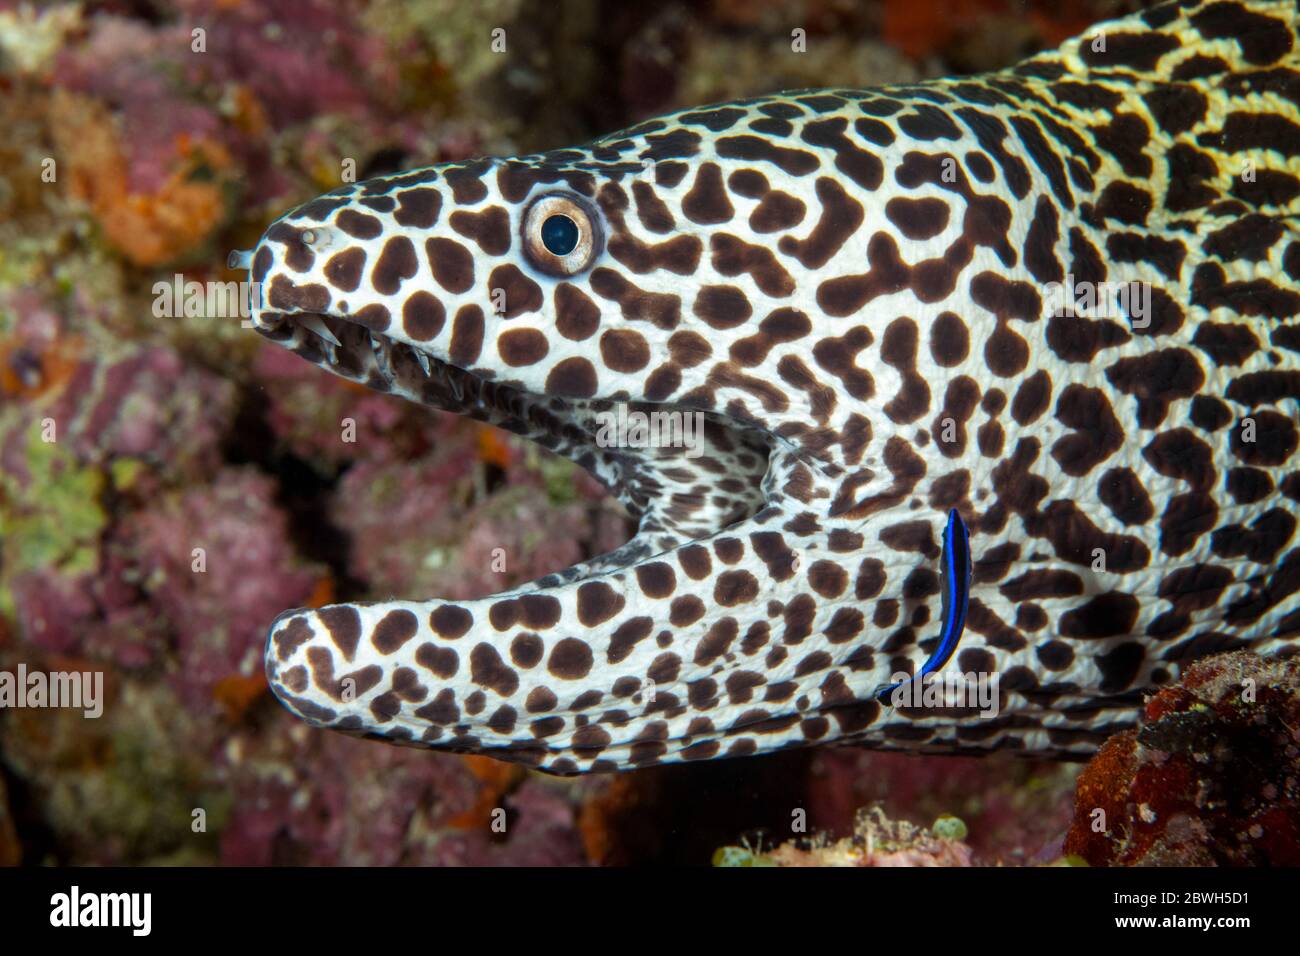 laced moray, leopard moray, tessellate moray, or honeycomb moray, Gymnothorax favagineus, being cleaned by a cleaner wrasse, Labroides sp., Maldives, Stock Photo